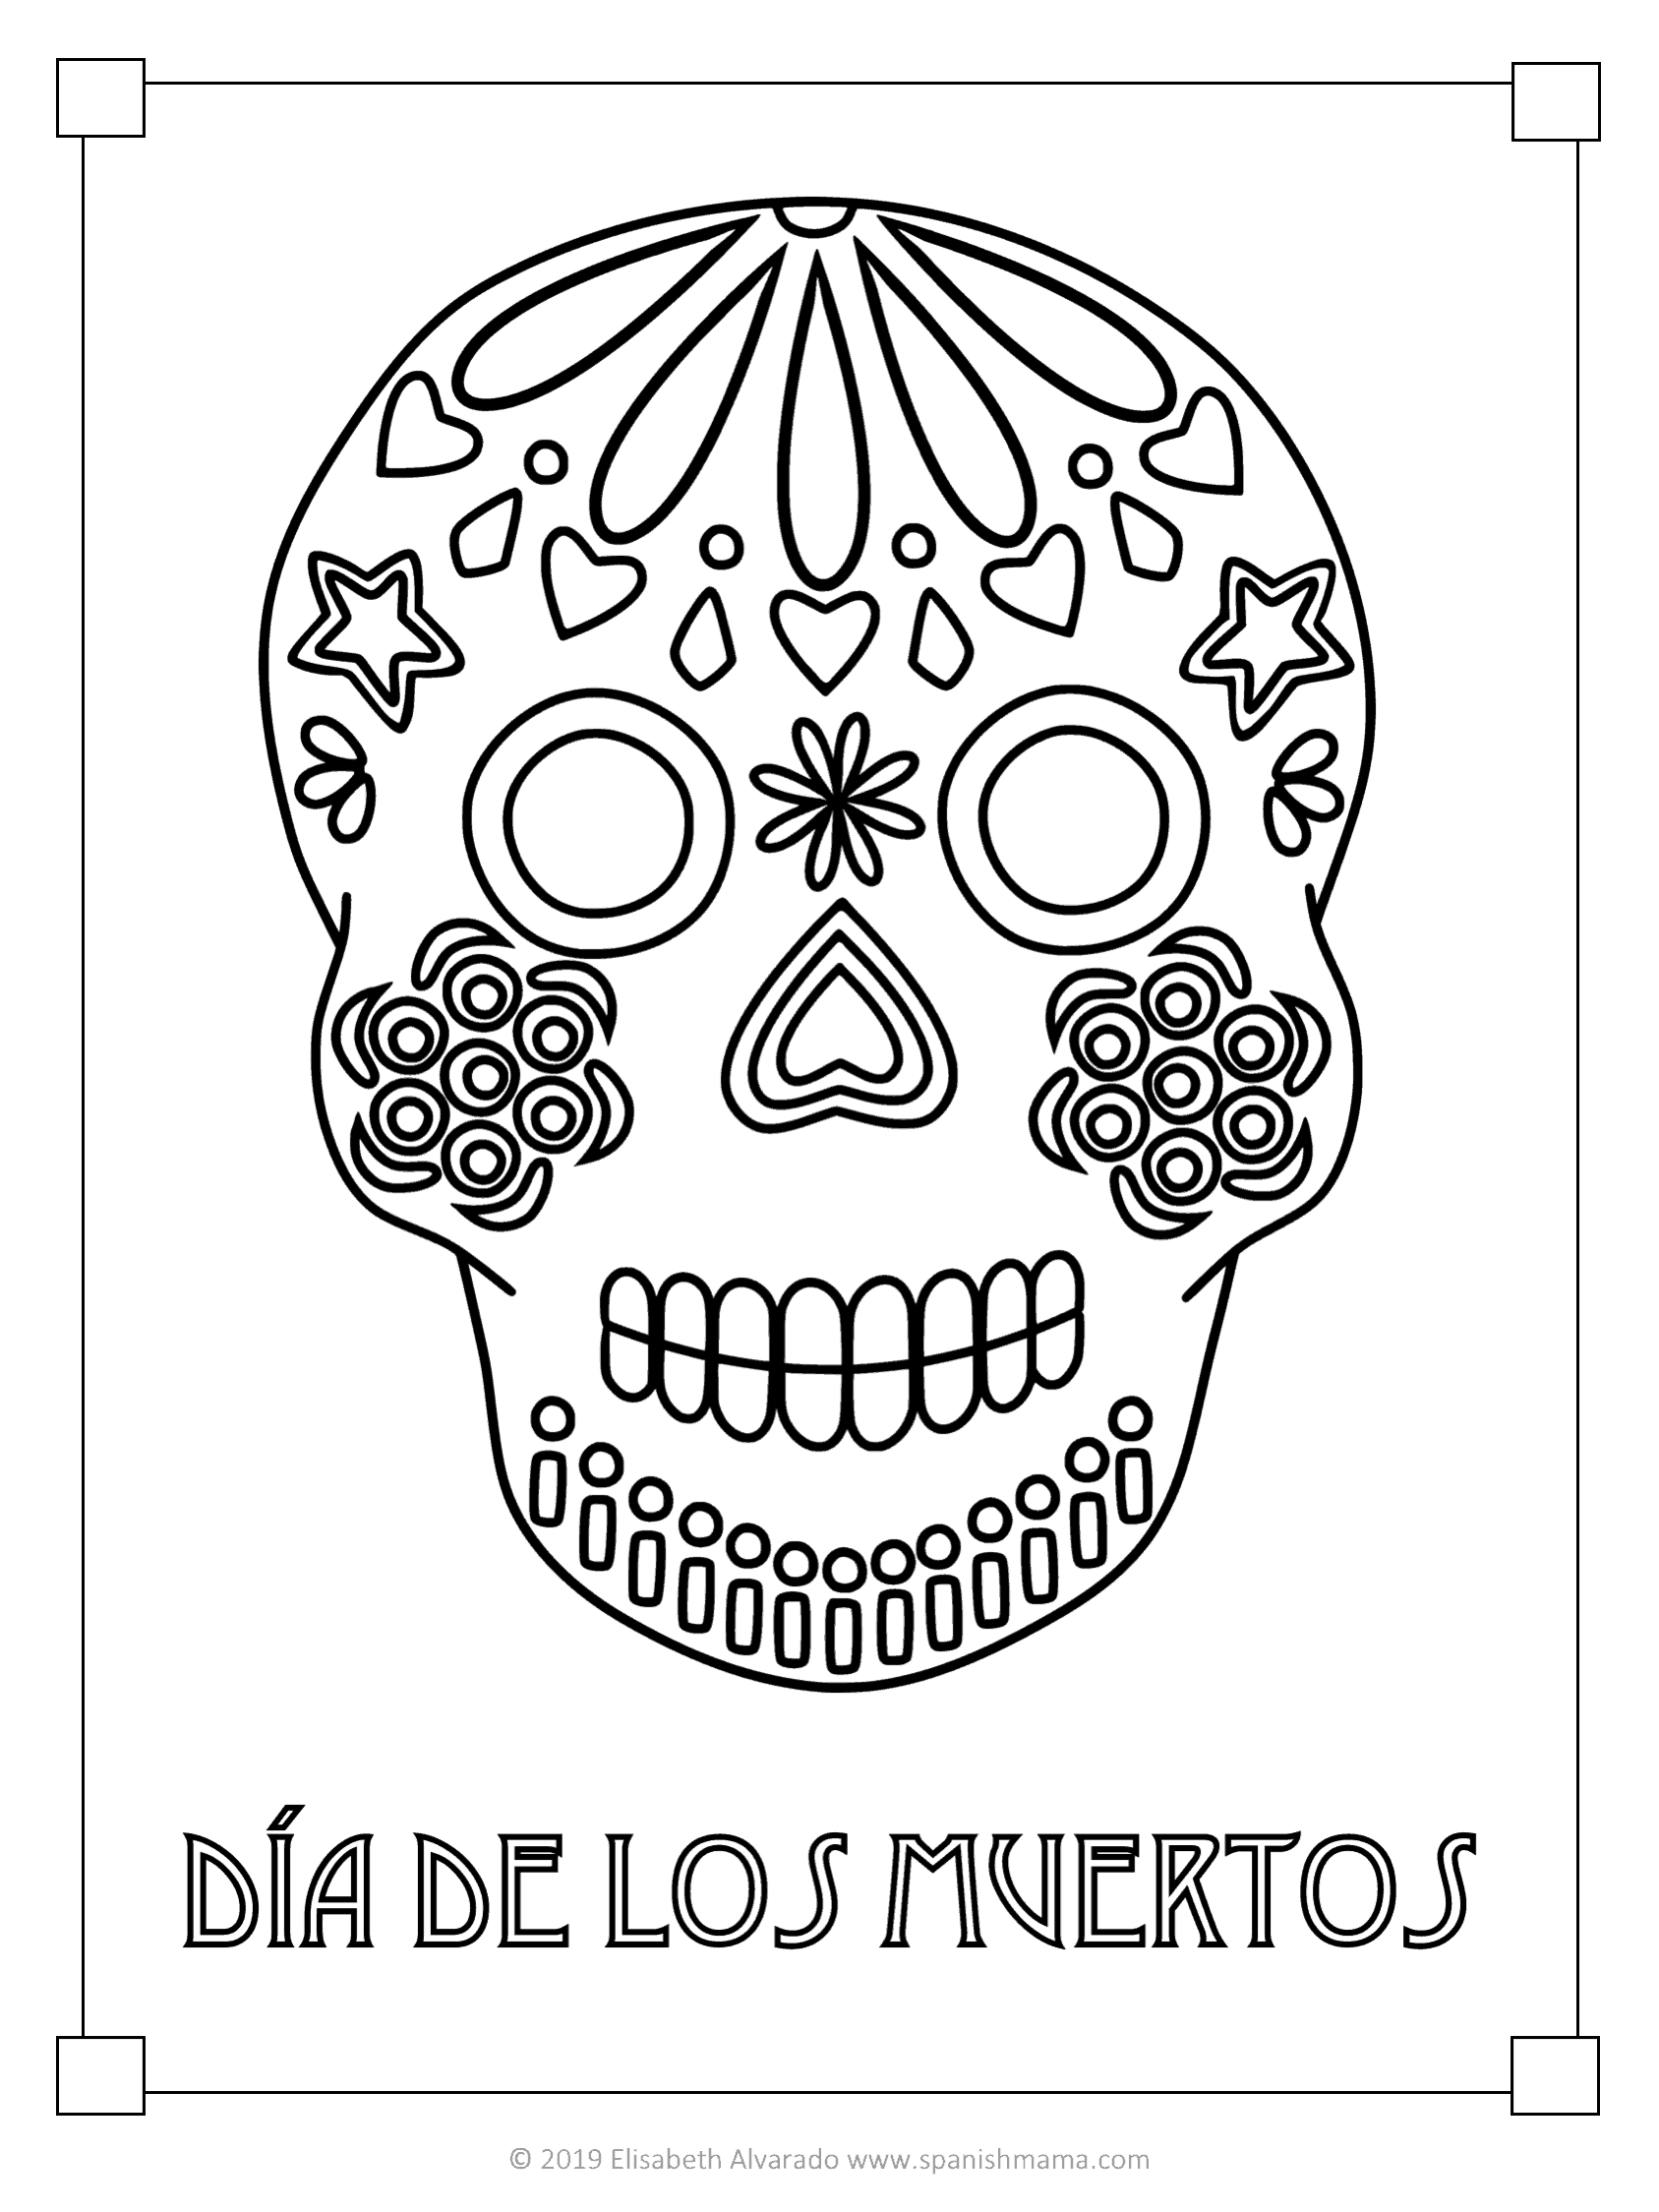 Sugar skull coloring pages and masks for dãa de muertos skull coloring pages coloring pages skull template